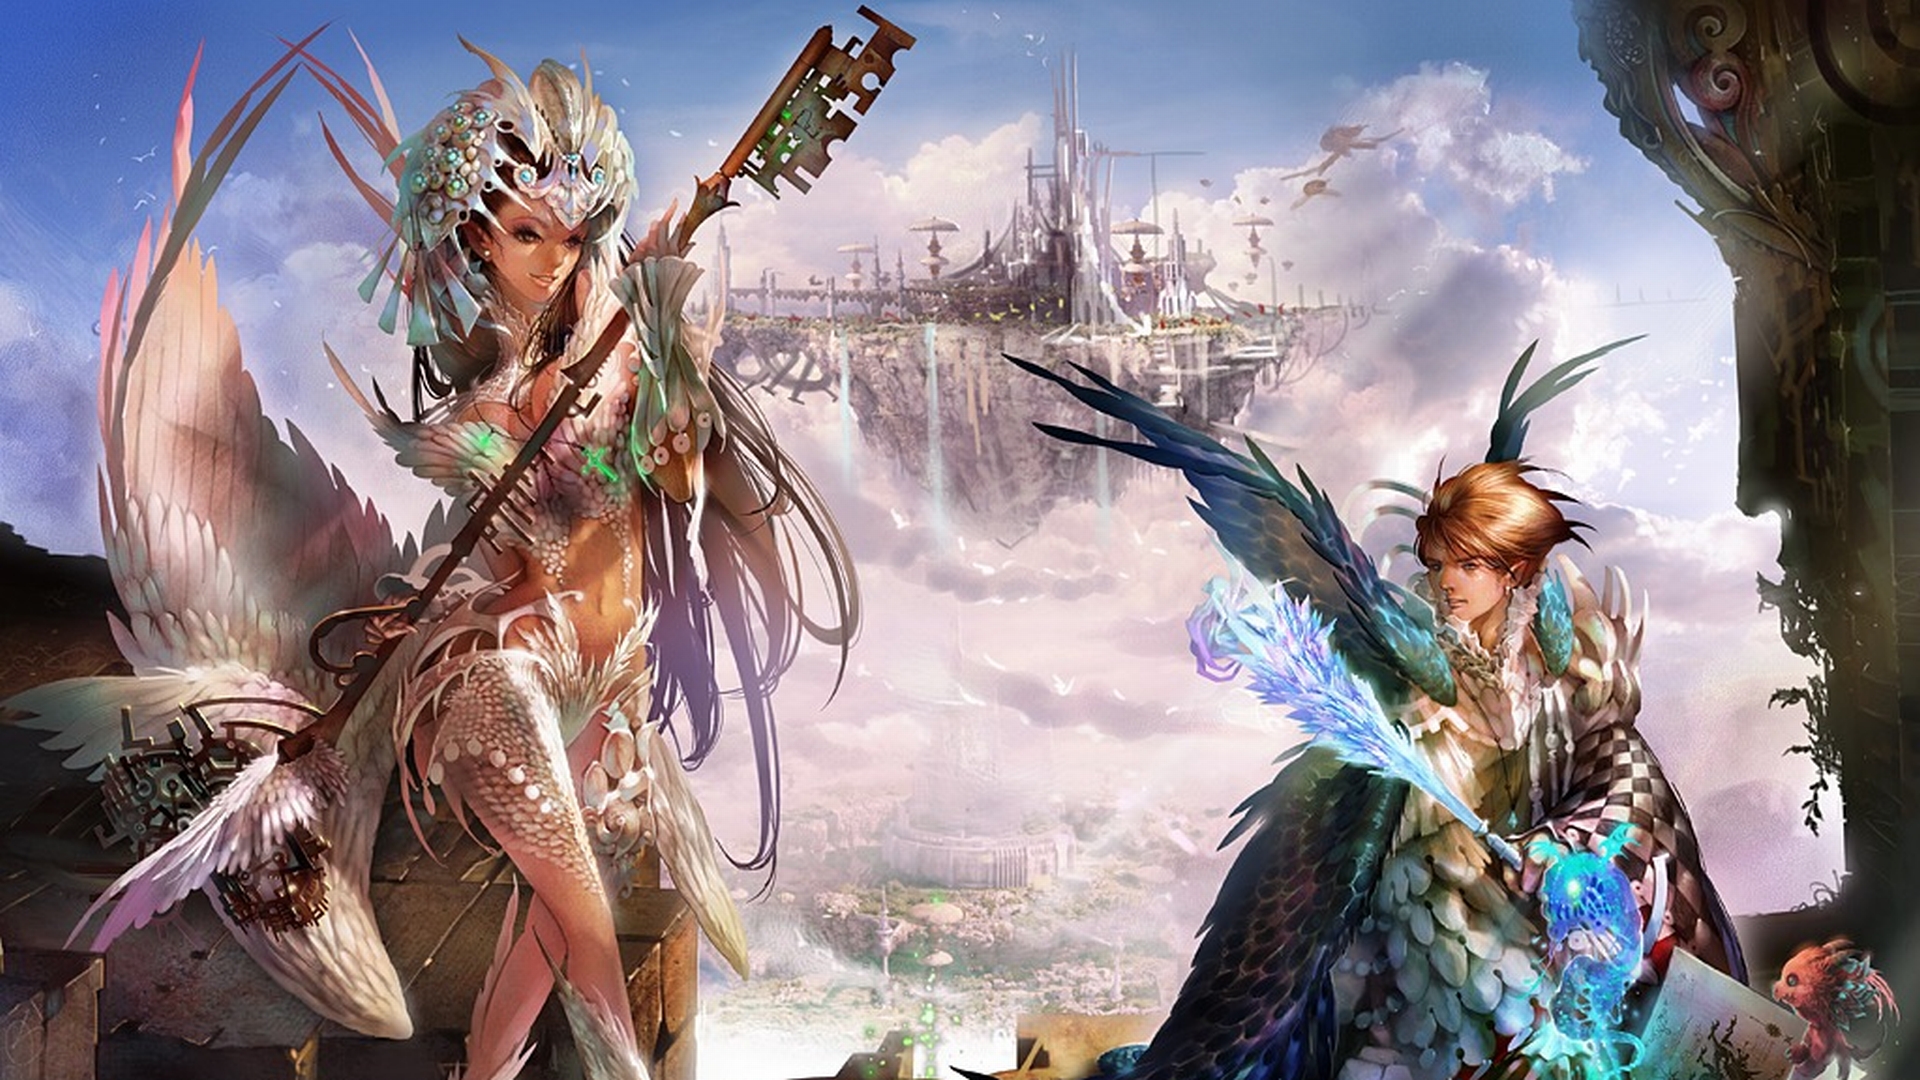 epic wallpapers 1920x1080,cg artwork,mythology,pc game,games,fictional character